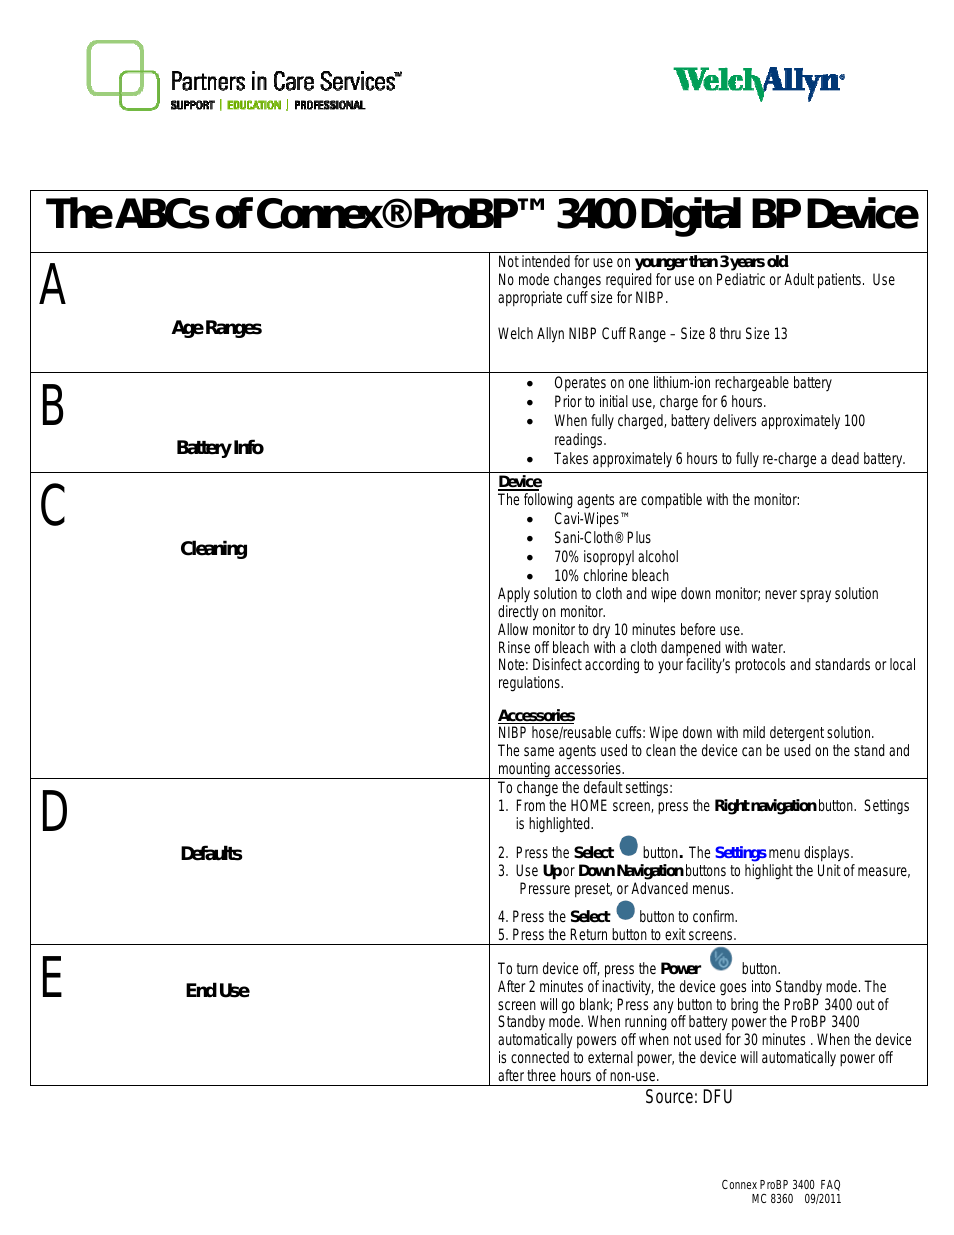 ABCs of Connex ProBP 3400 Digital BP Device - Quick Reference Guide